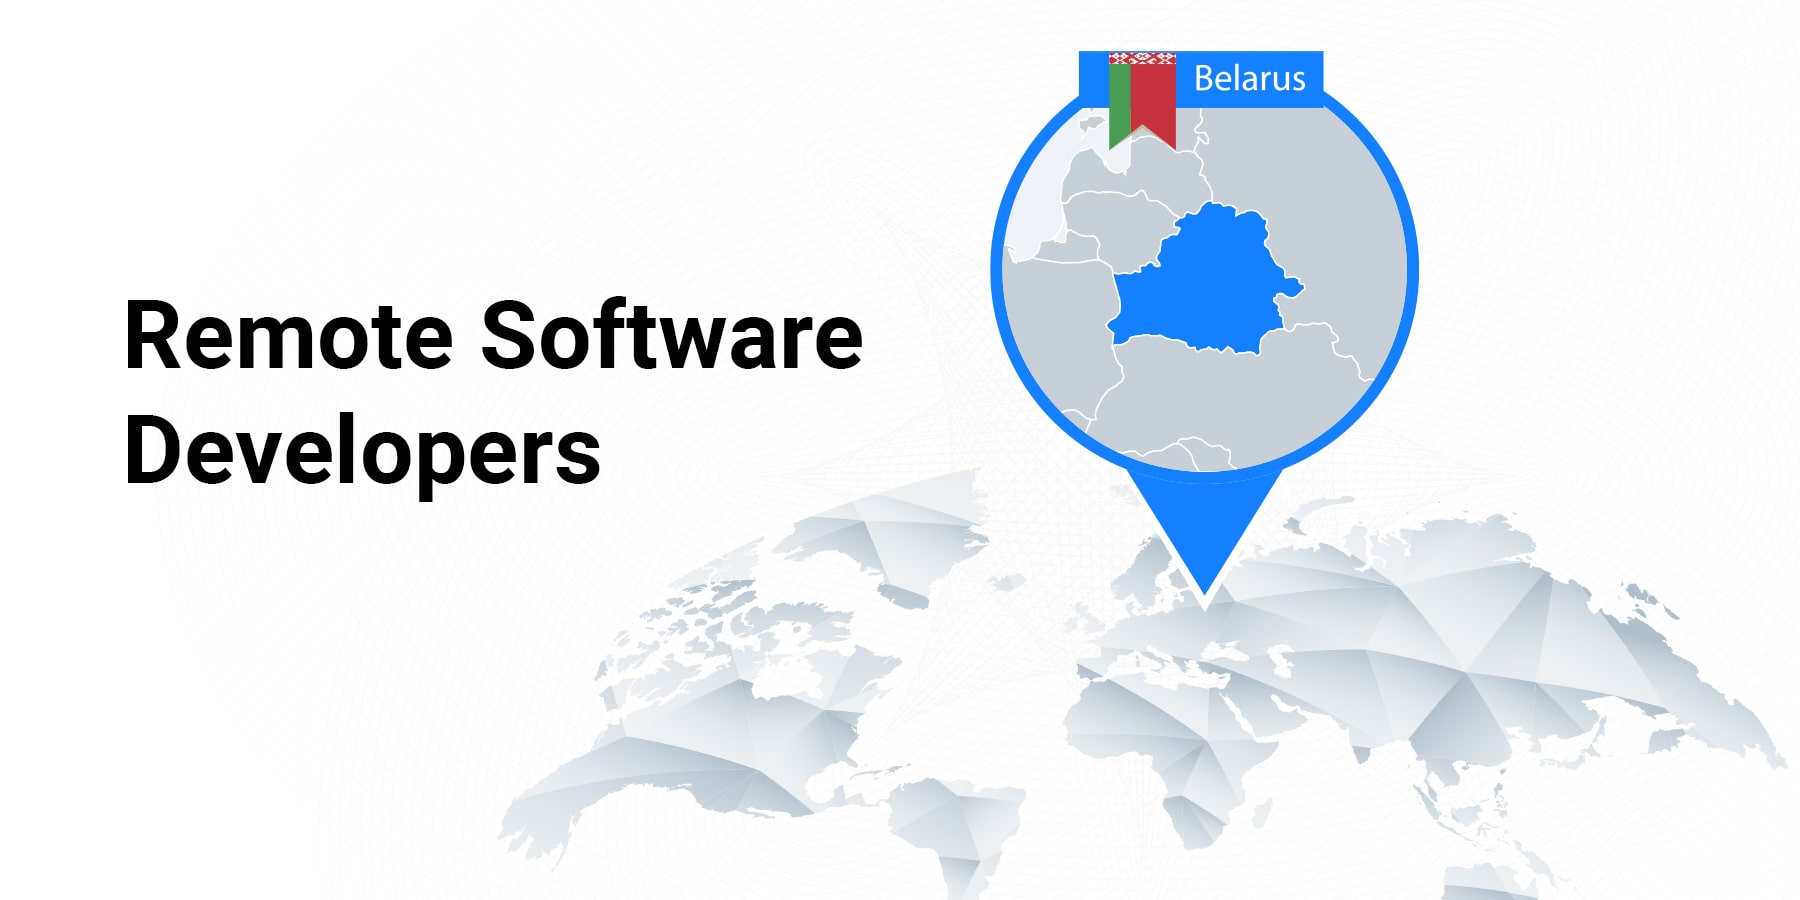 Belarus: Where a Pool of Great Remote Software Developers Come From